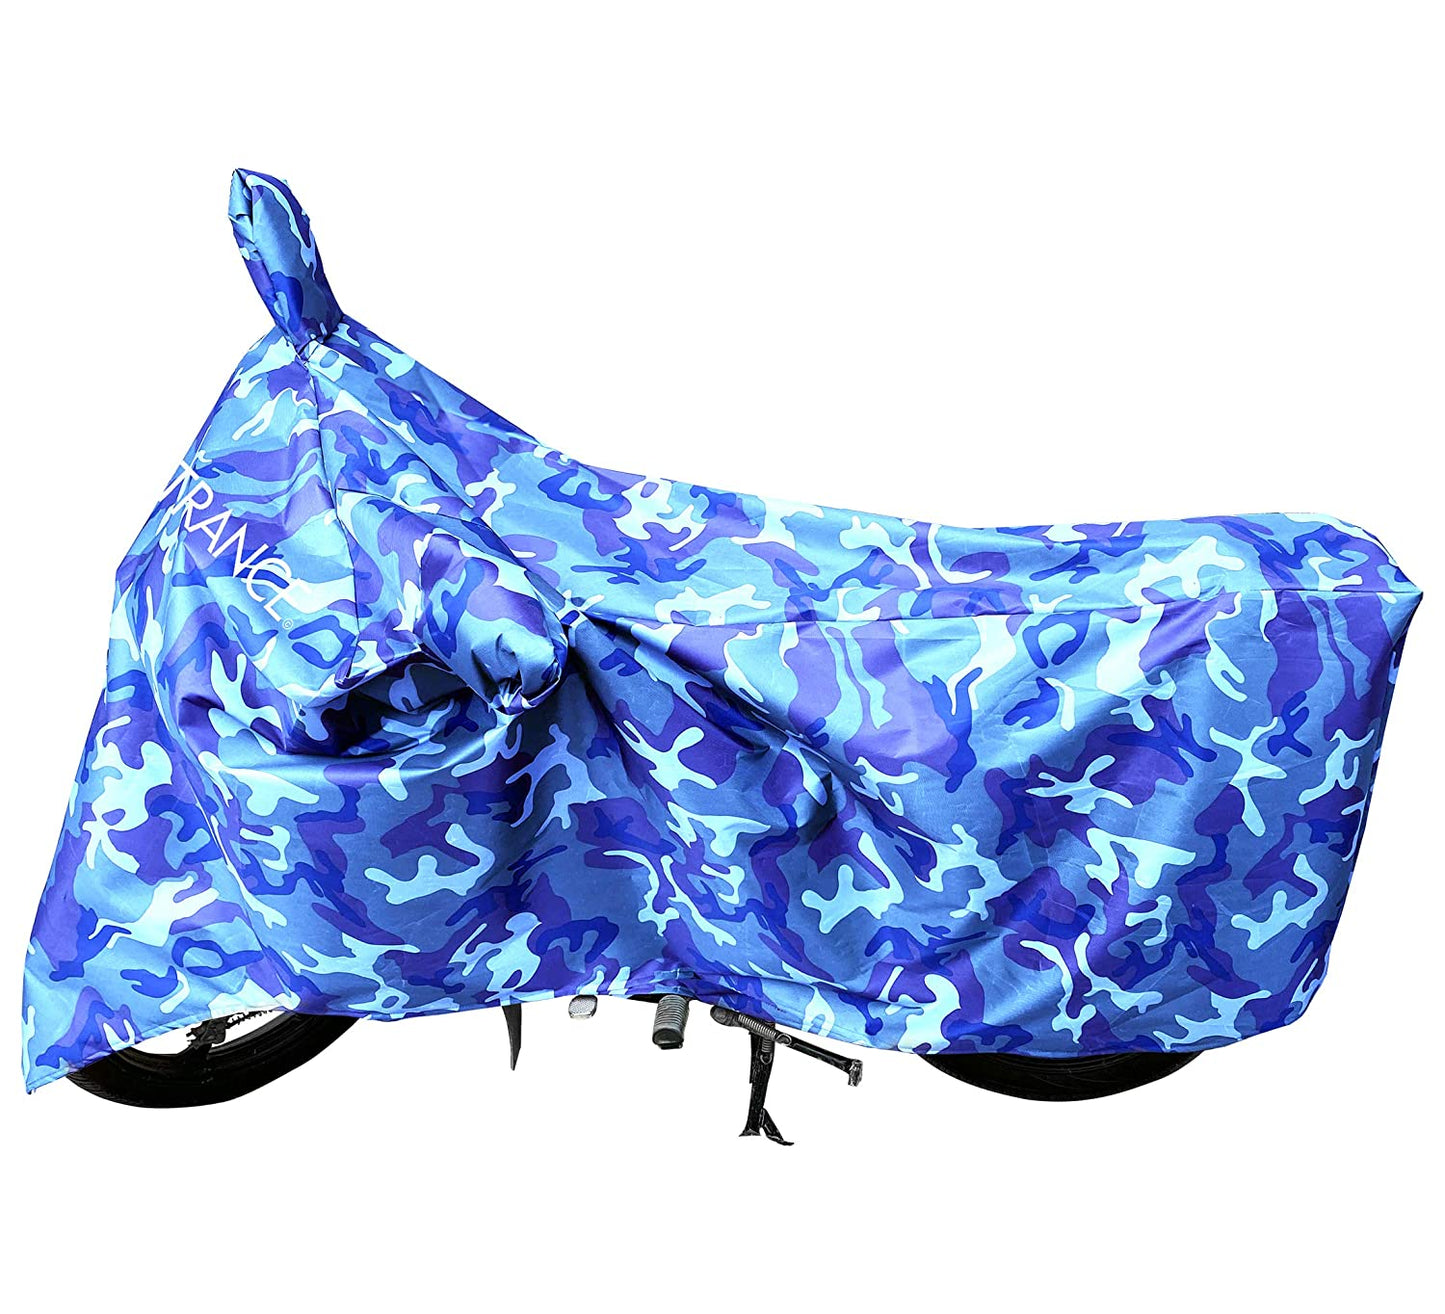 MotoTrance Jungle Bike Body Covers For HeroÂ  Xpulse 200T 2019 - Interlock-Stitched Waterproof and Heat Resistant with Mirror Pockets